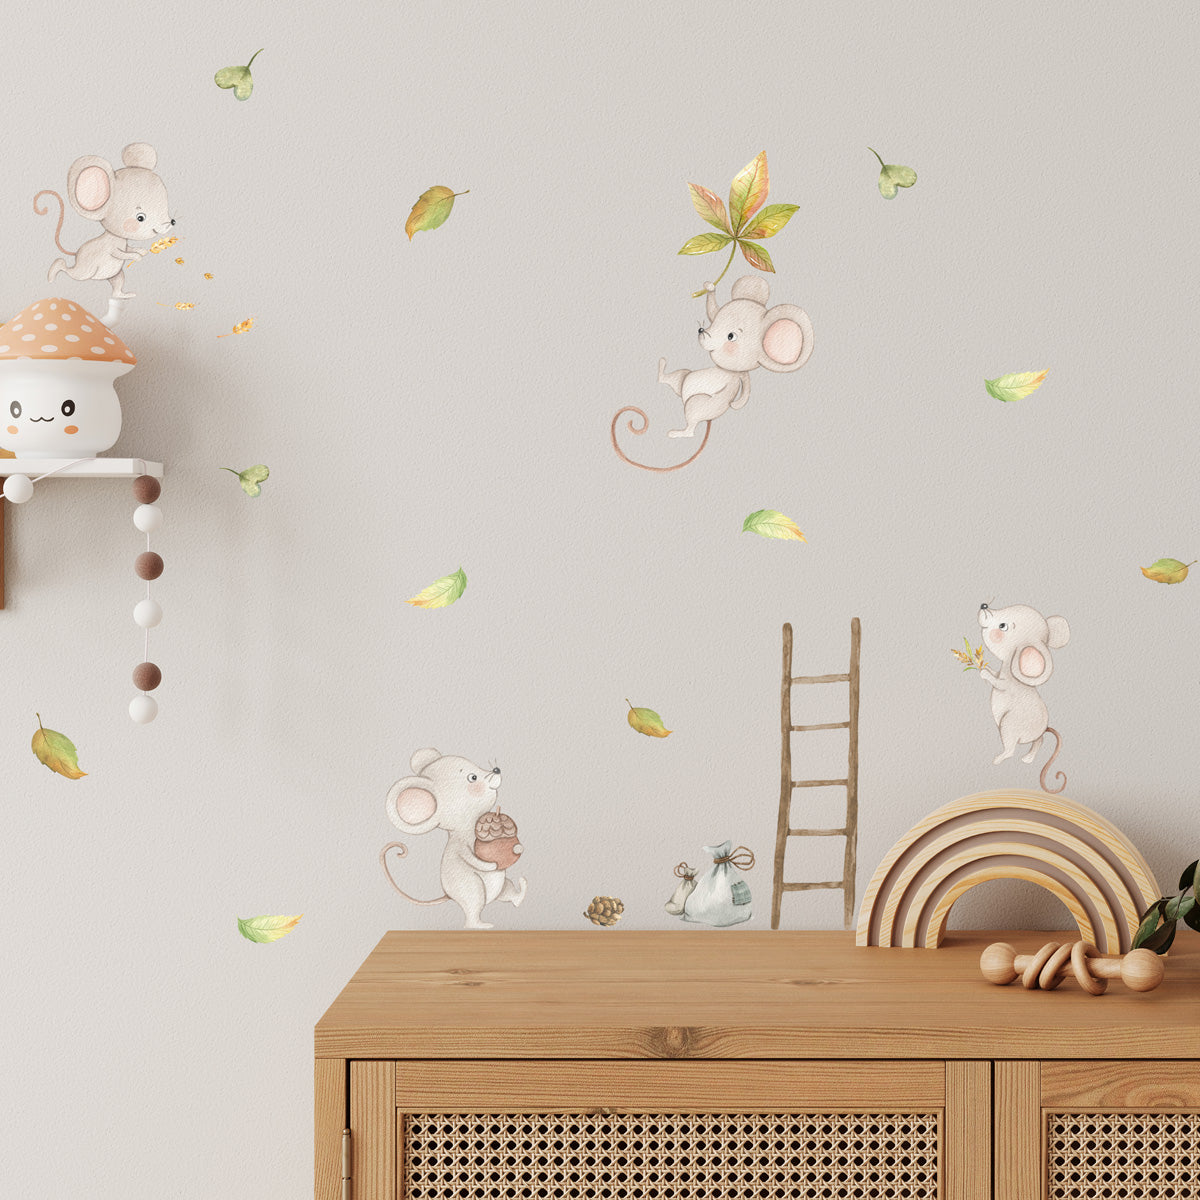 Mouse Wall Stickers for a Child's Room